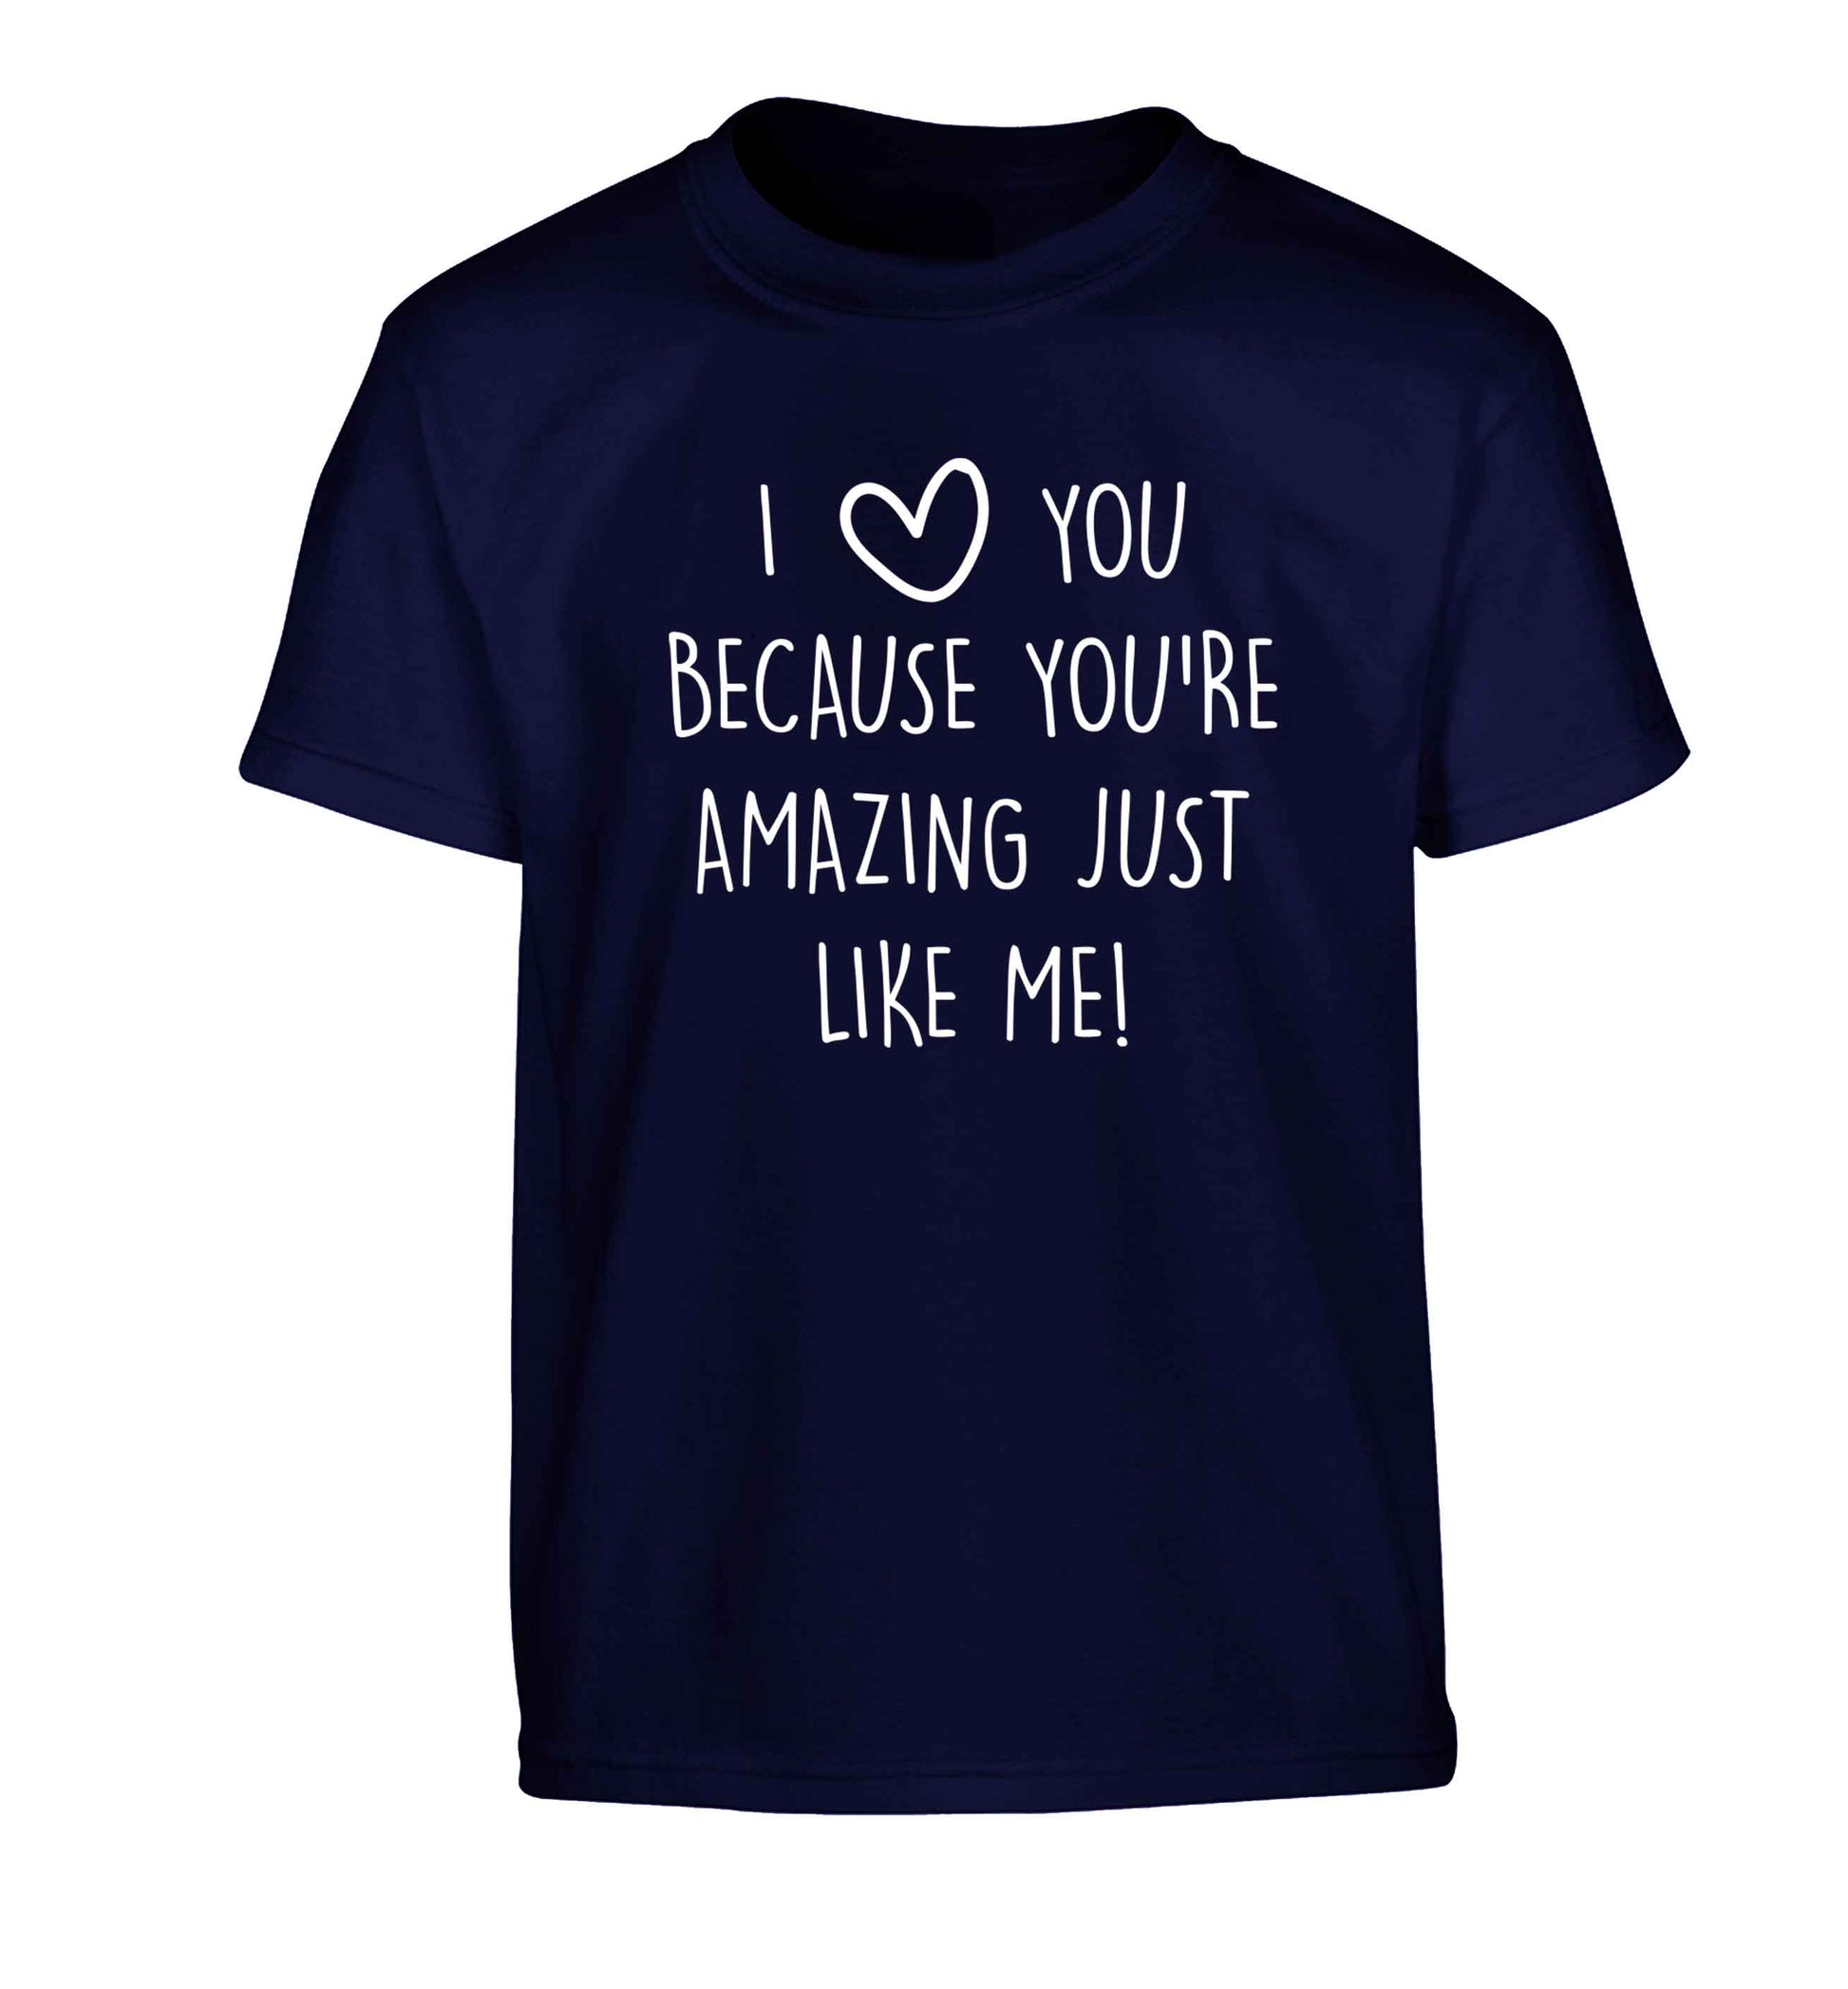 I love you because you're amazing just like me Children's navy Tshirt 12-13 Years